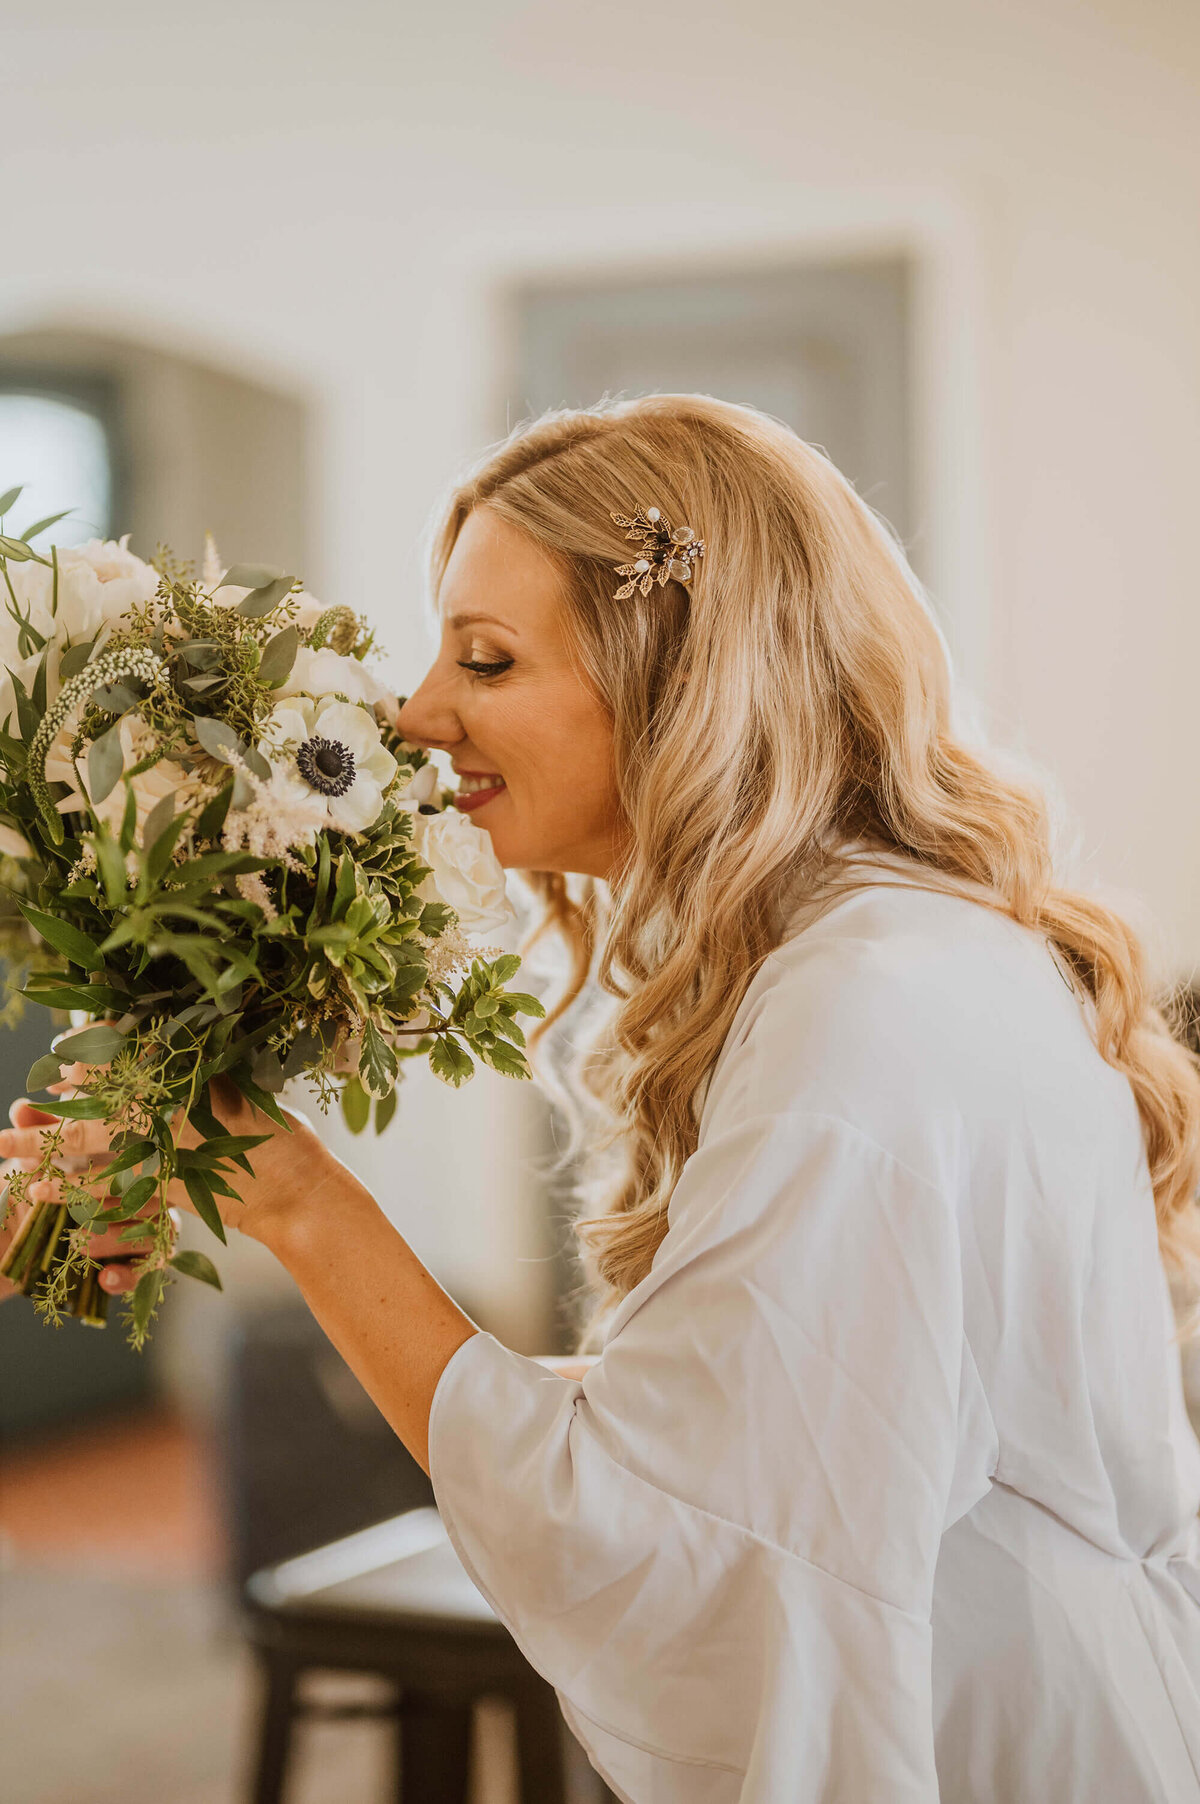 A bride smelling her bridal bouquet in Tahoe.